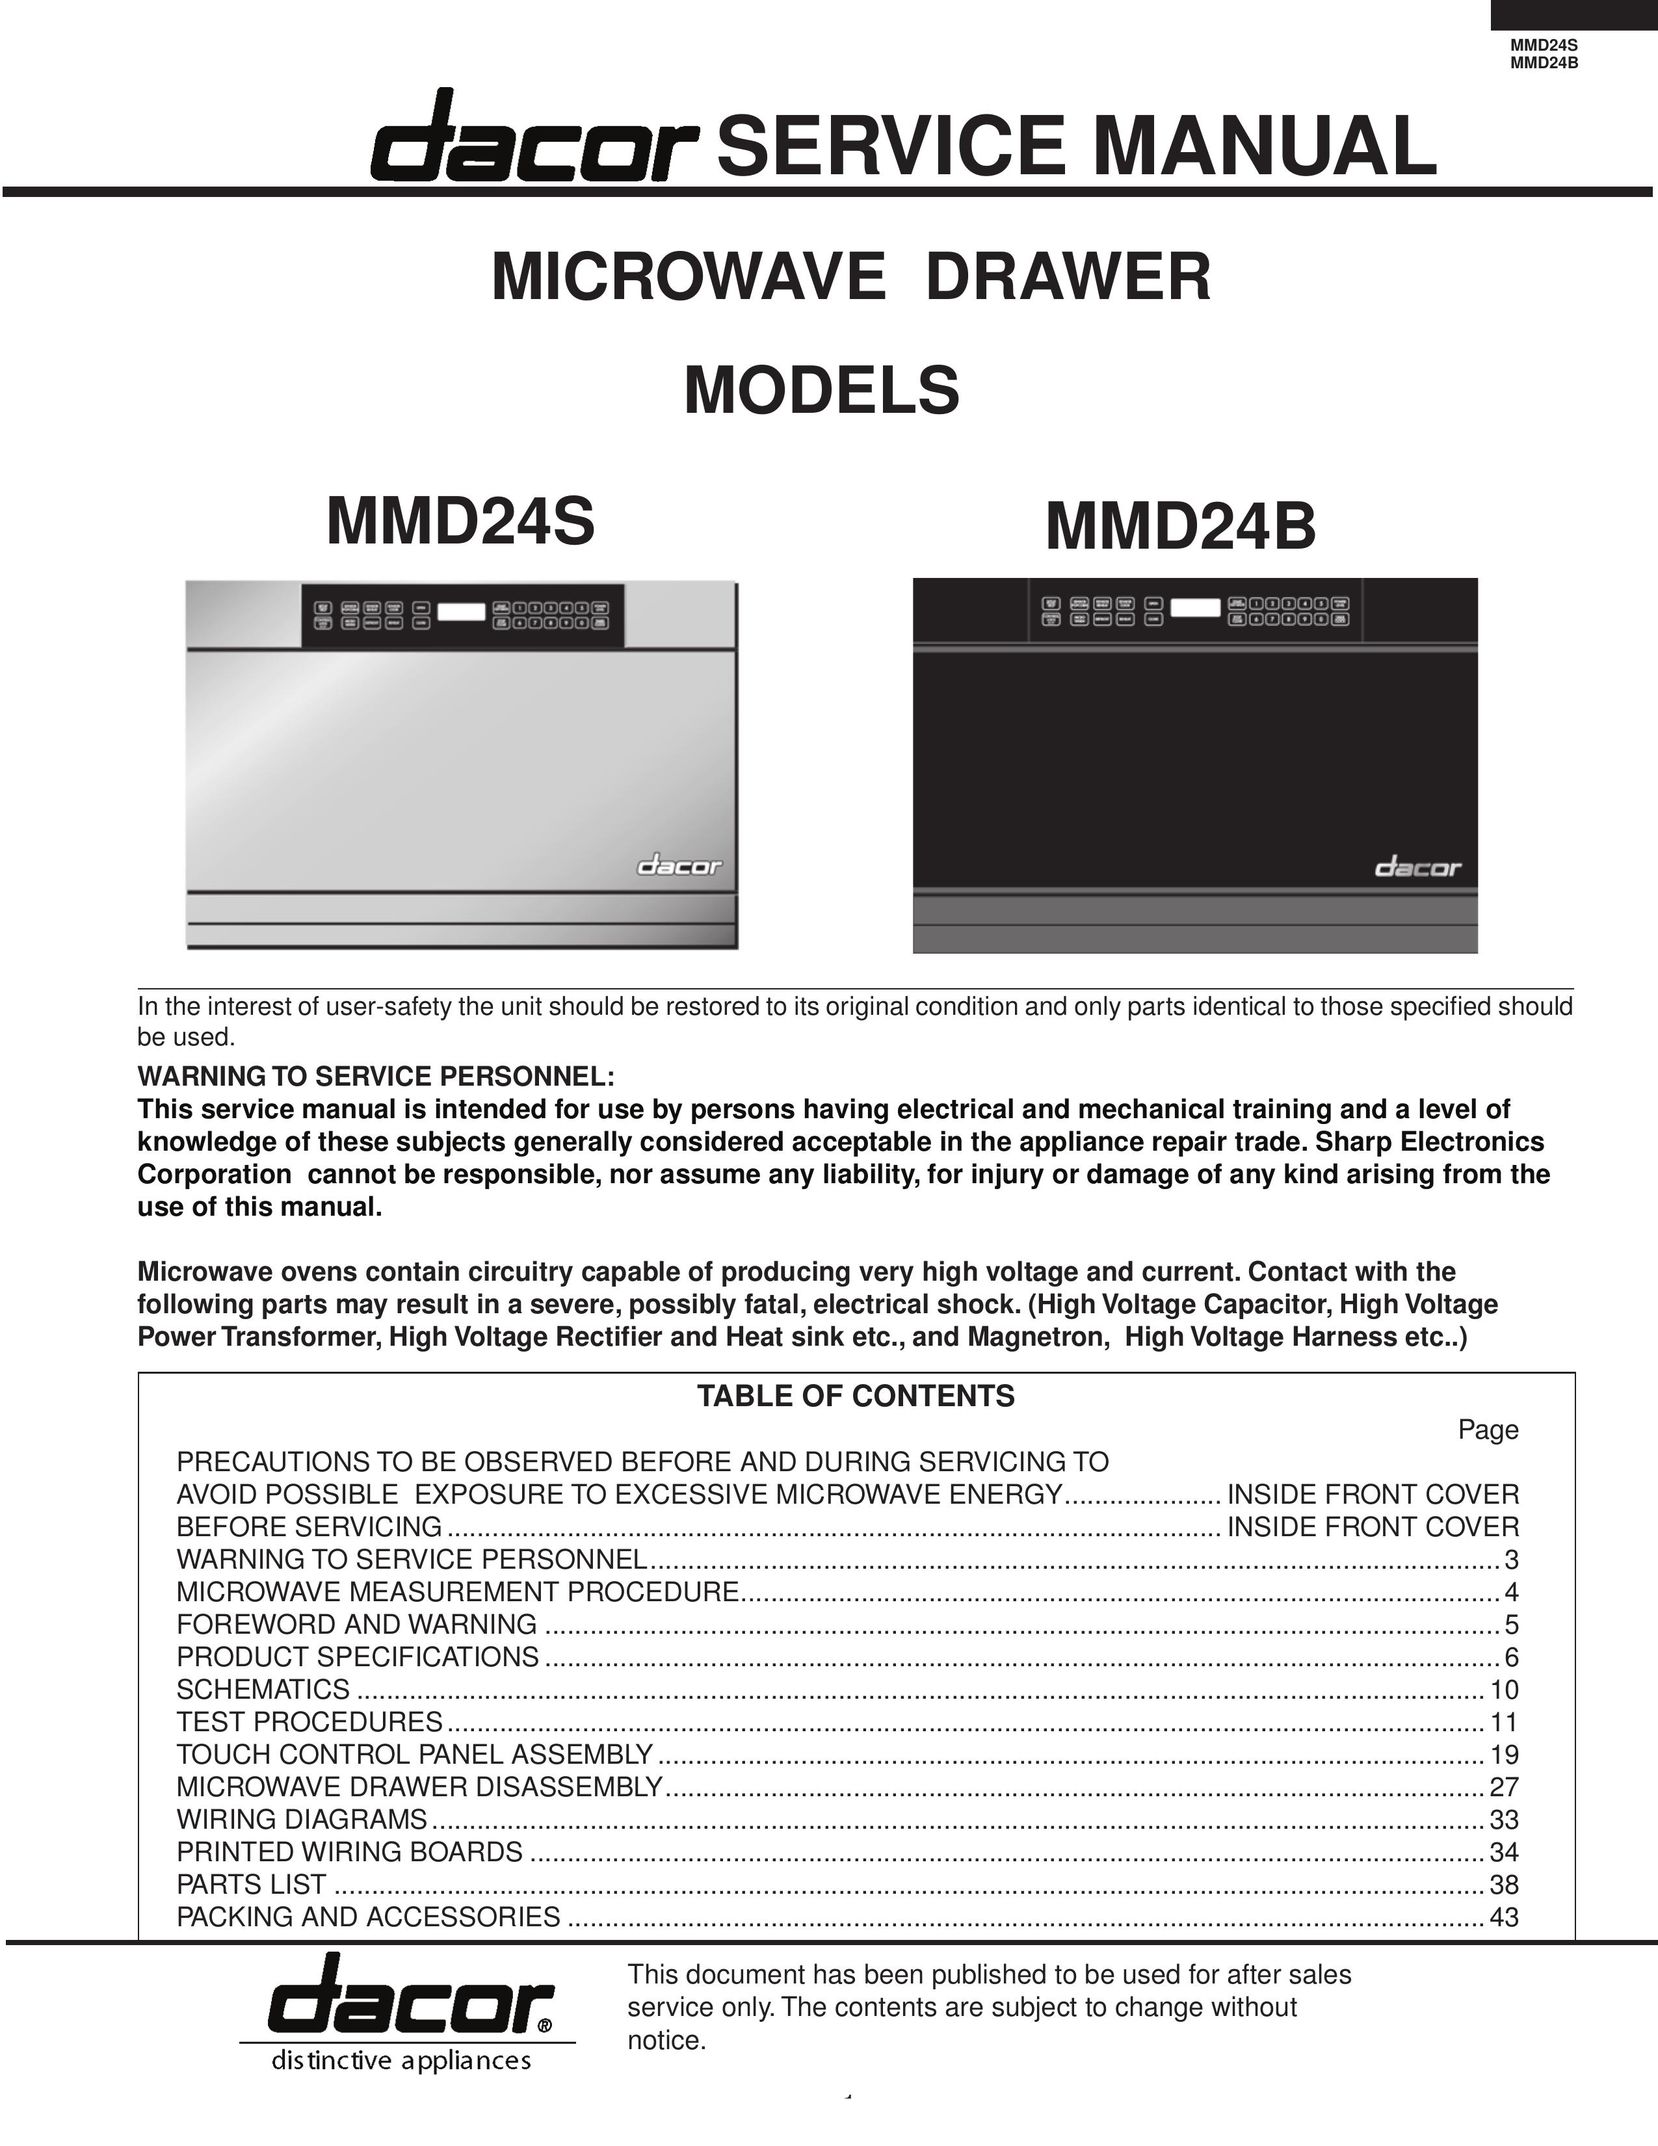 Sharp MMD24S Microwave Oven User Manual